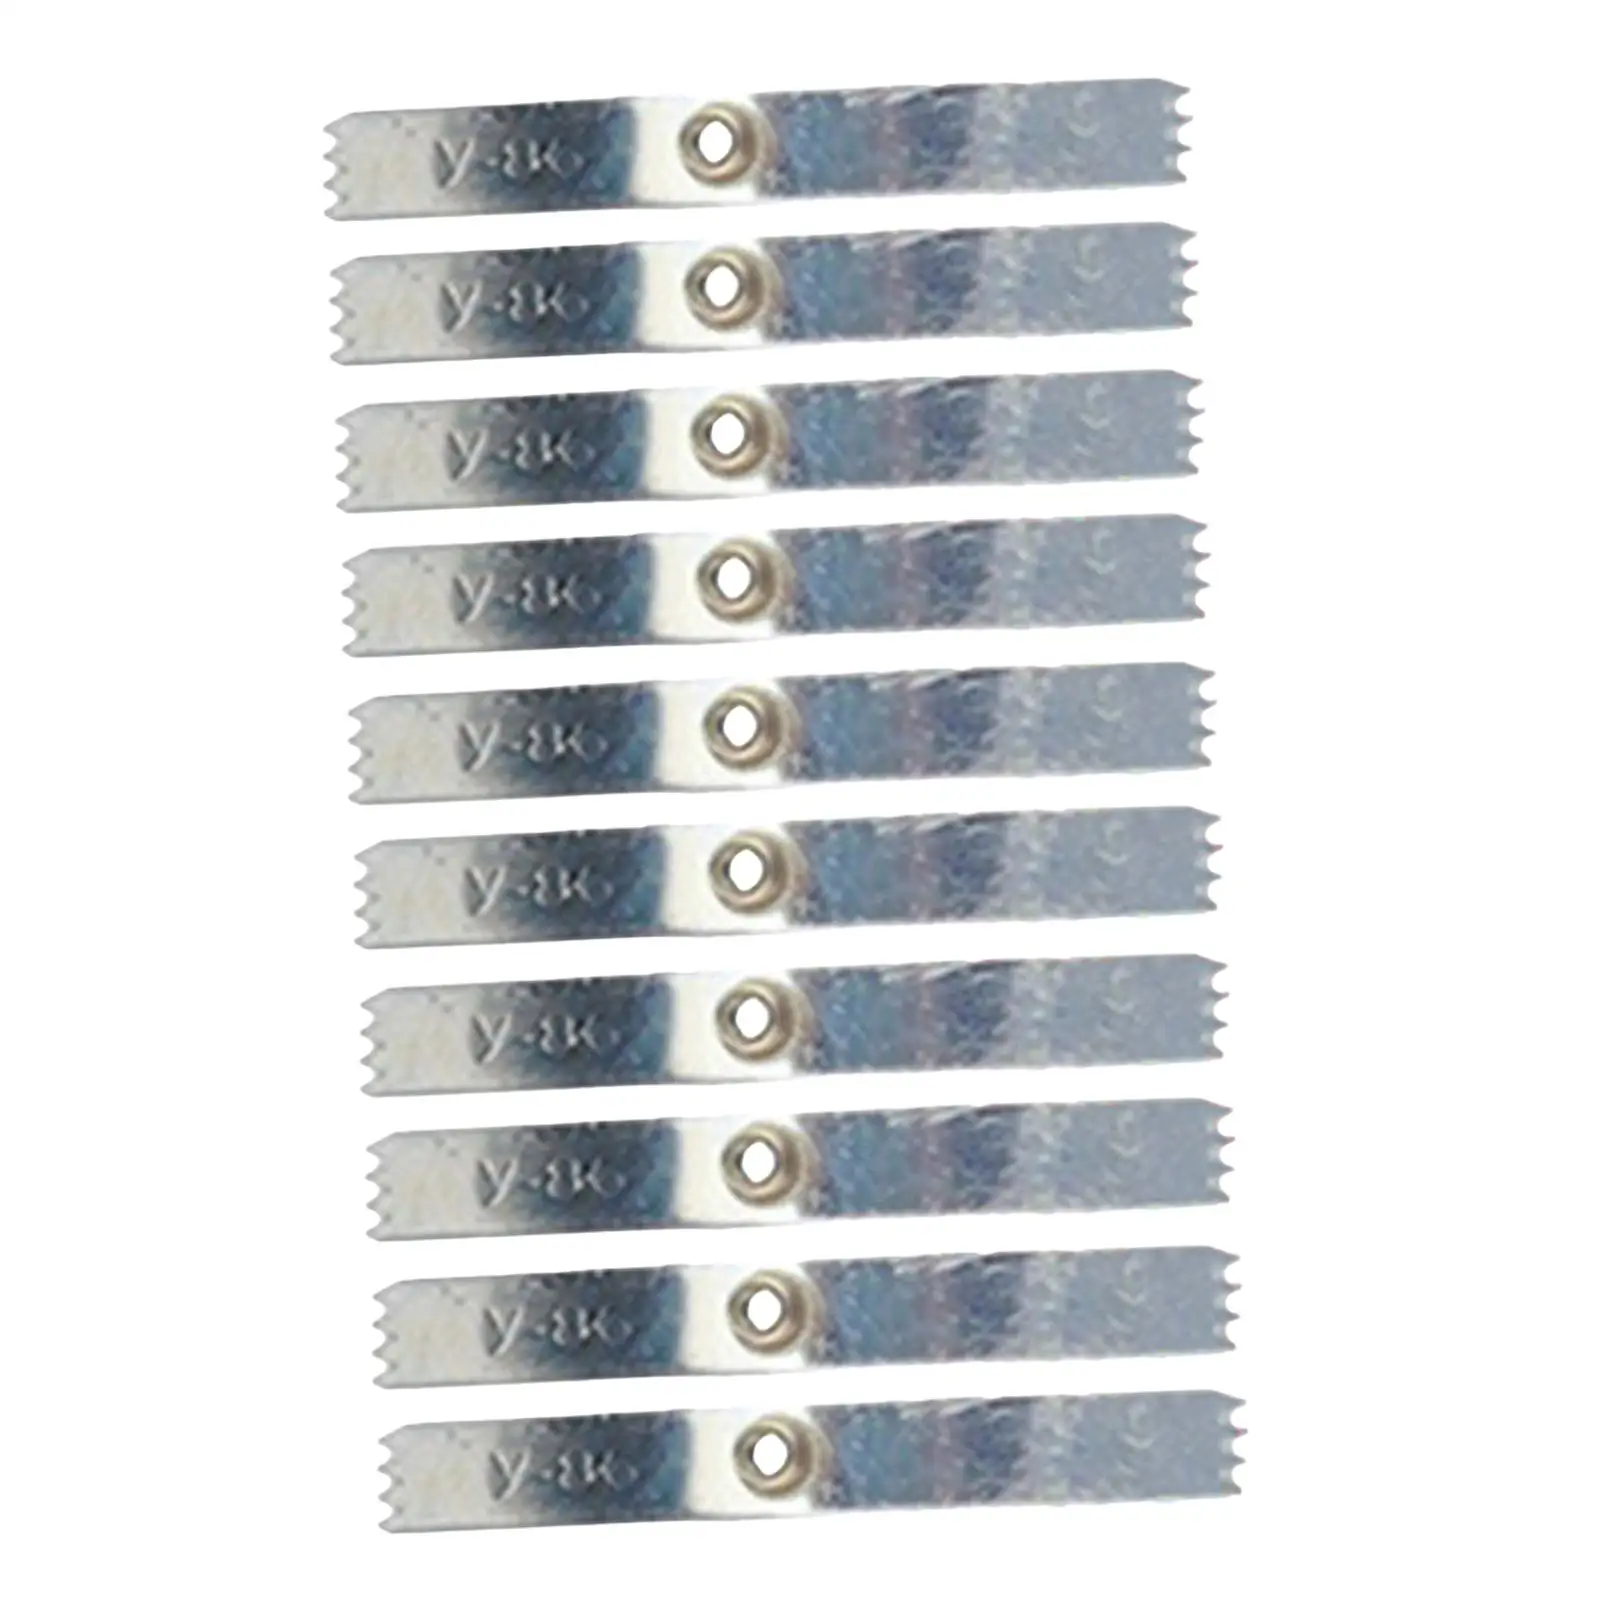 Cassette Screws Support Rod 86 Type Electrical Accessories for Wall Mount Switch Box